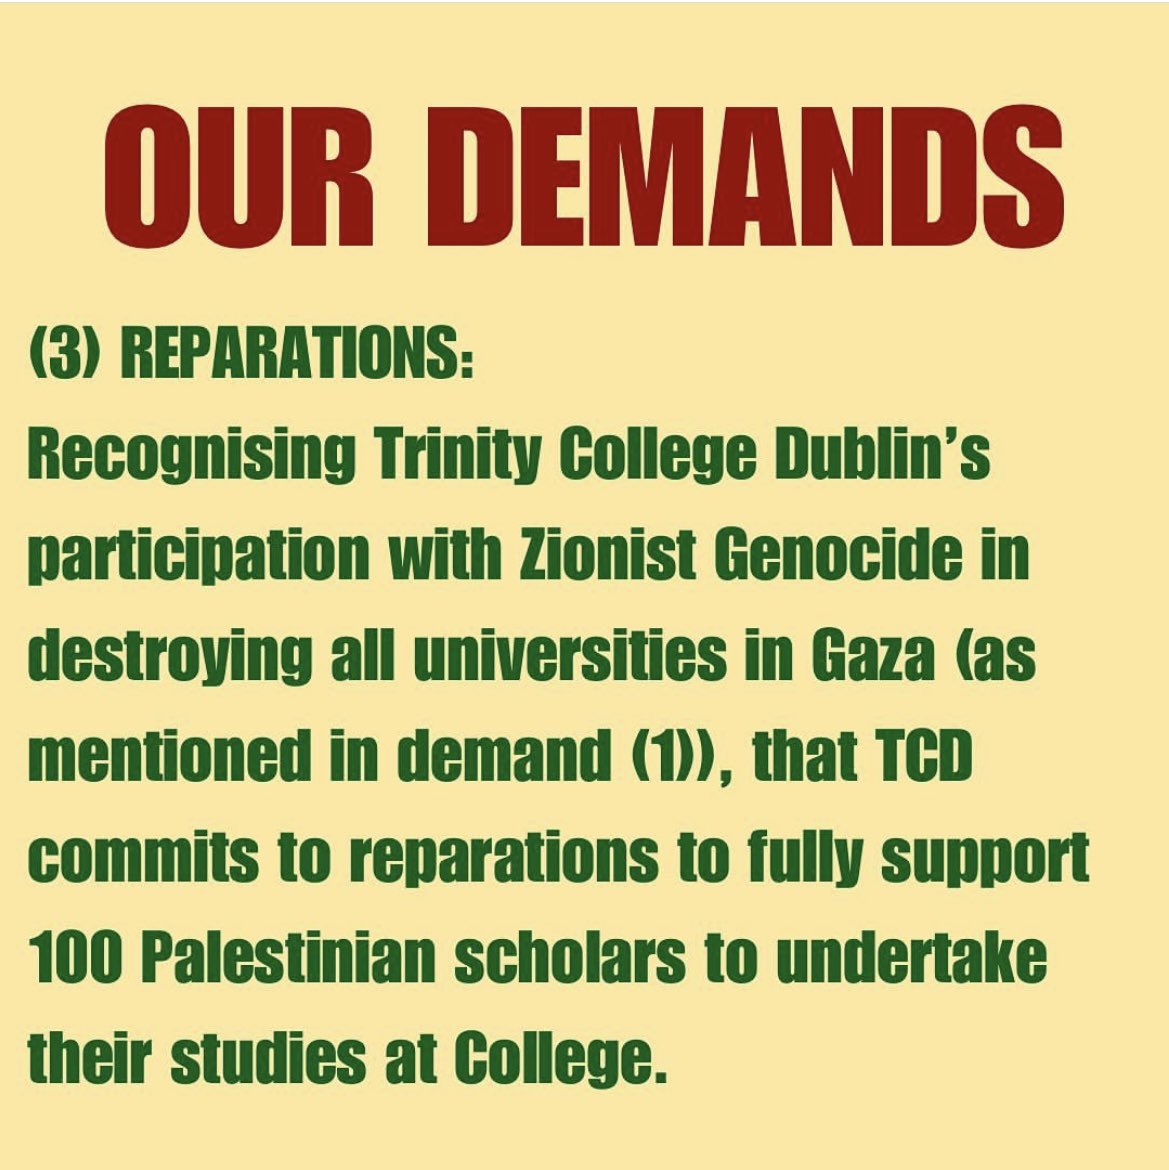 WE HAVE STARTED AN ENCAMPMENT ON TRINITY’S CAMPUS. TRINITY HAS CLOSED DOWN THE CAMPUS TO EVERYONE EXCEPT STUDENTS AND STAFF. WE NEED ALL THE SUPPORT WE CAN GET FROM STUDENTS AND STAFF FREE PALESTINE ALL EYES ON GAZA 🇵🇸🇵🇸🇵🇸🇵🇸🇵🇸🇵🇸🇵🇸🇵🇸